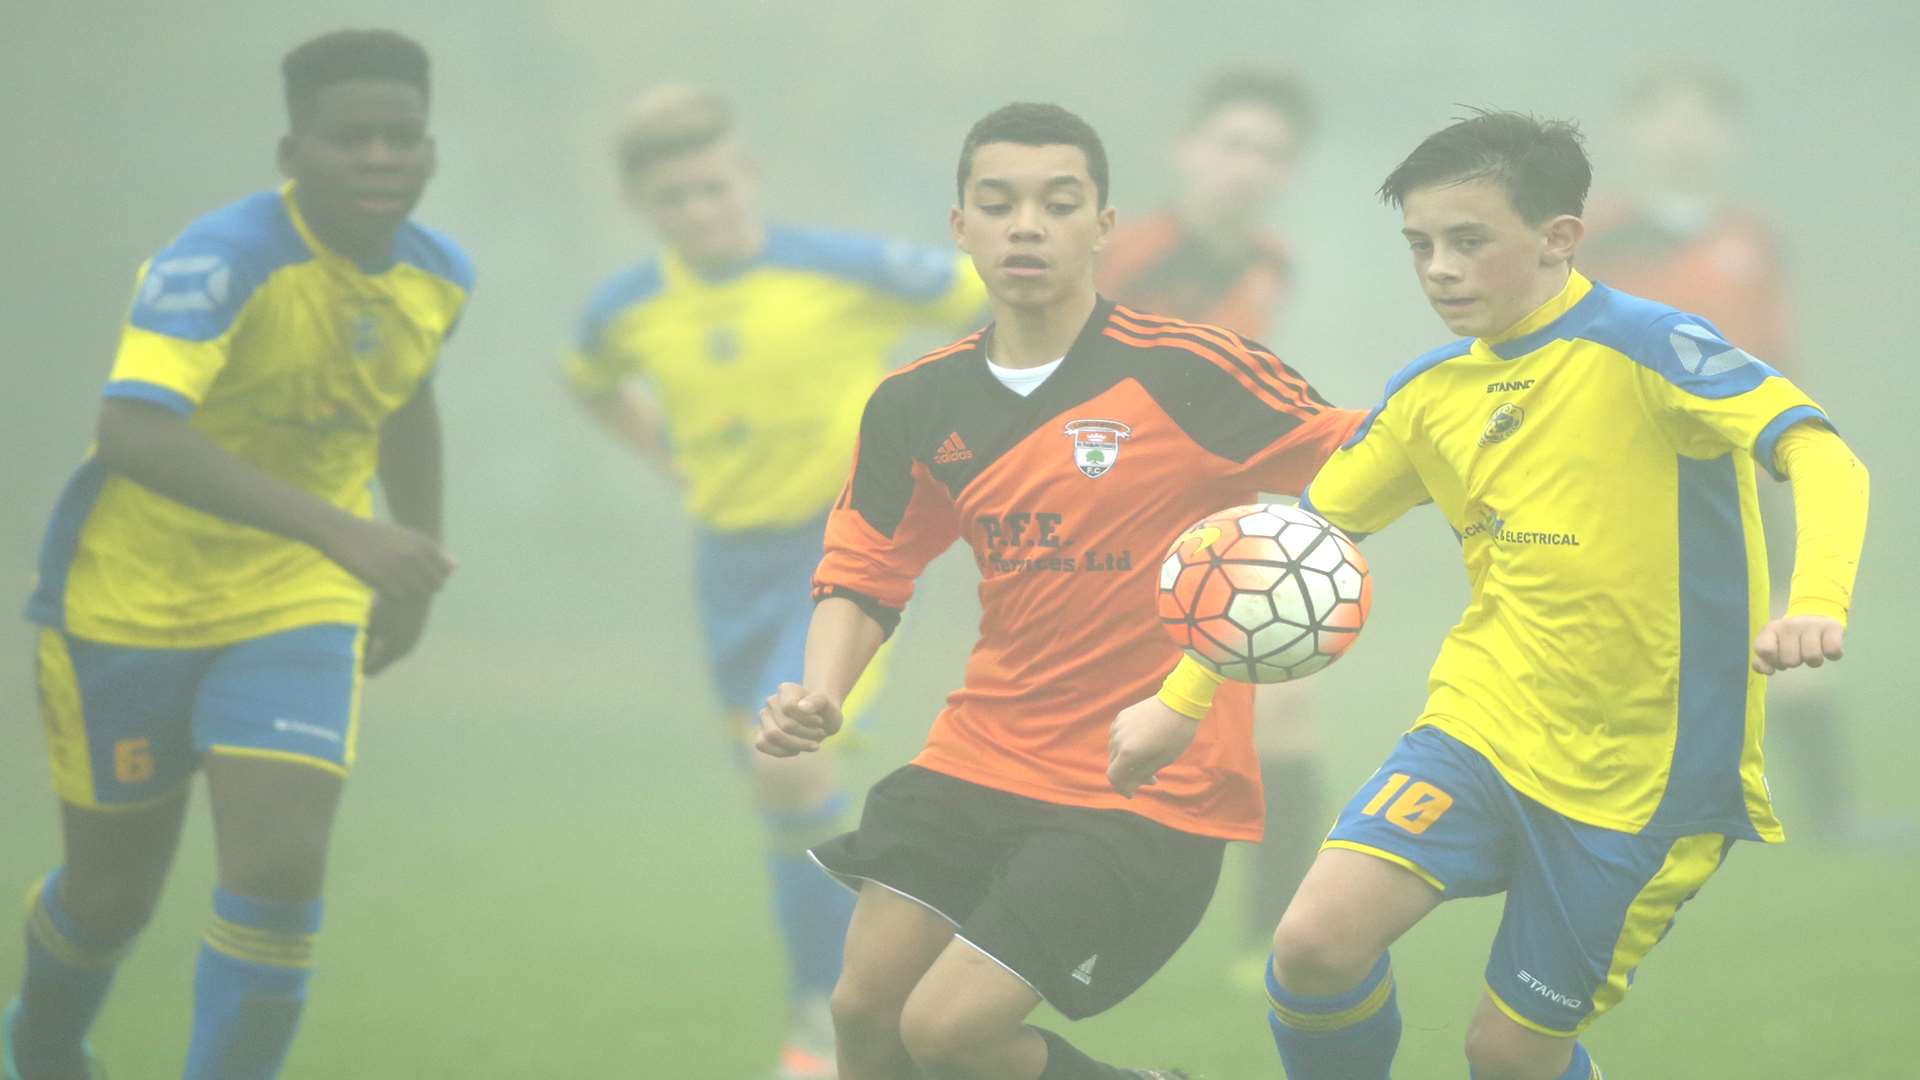 Strood 87 (yellow) and Lordswood Youth battle the fog as well as each other in Under-14 Division 1 Picture: Martin Apps